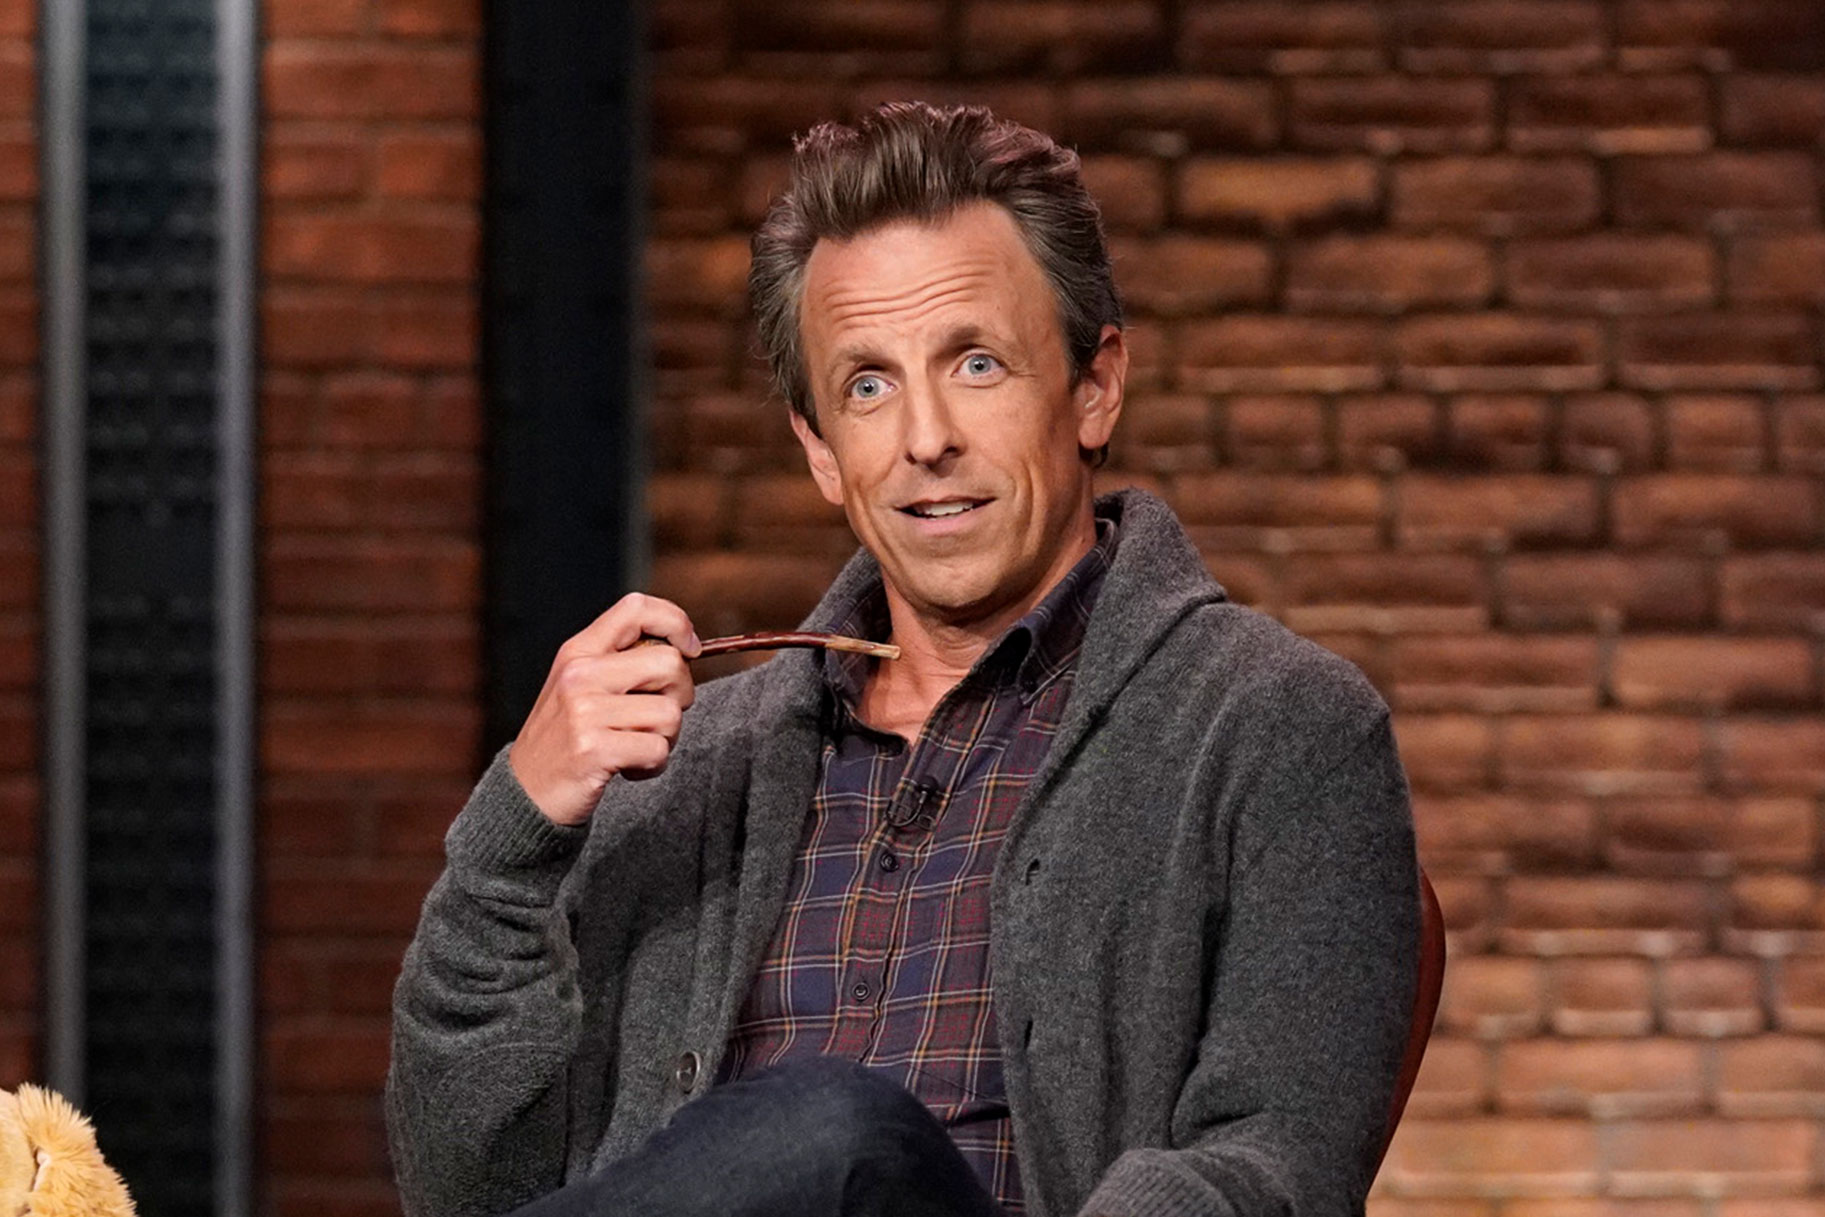 Seth Meyers sitting in a chair, smoking a pipe